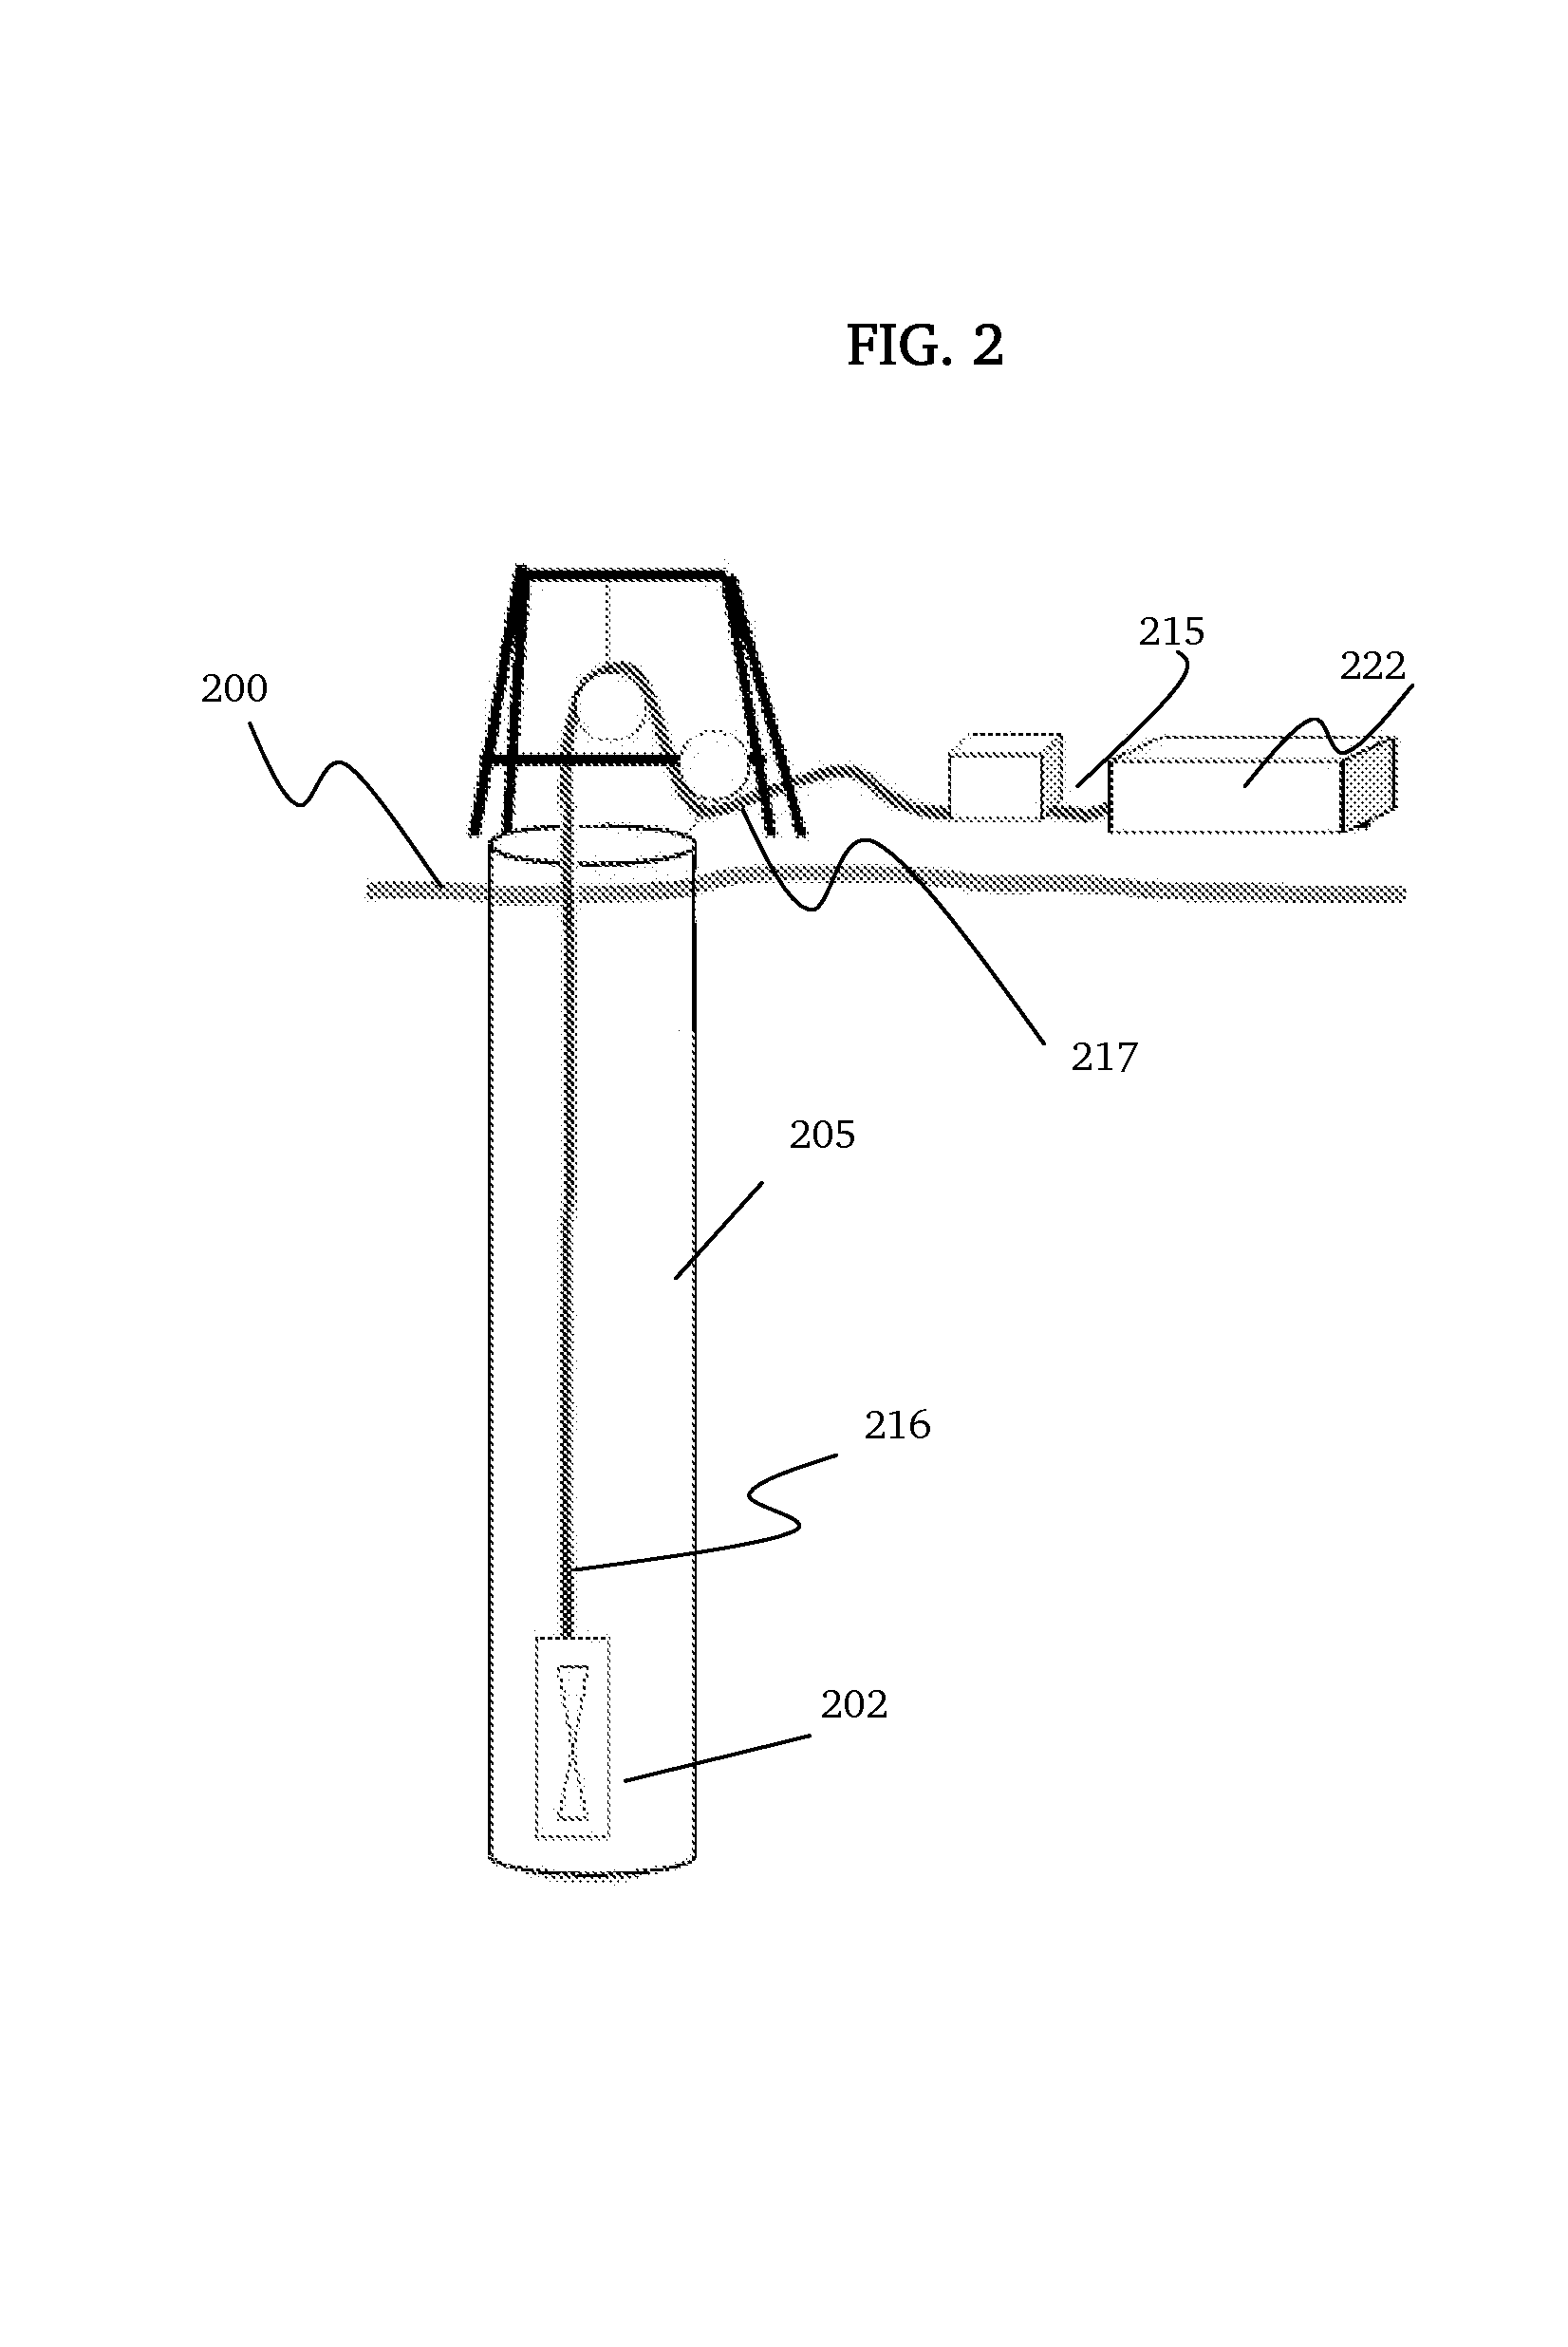 Logging device with down-hole transceiver for operation in extreme temperatures